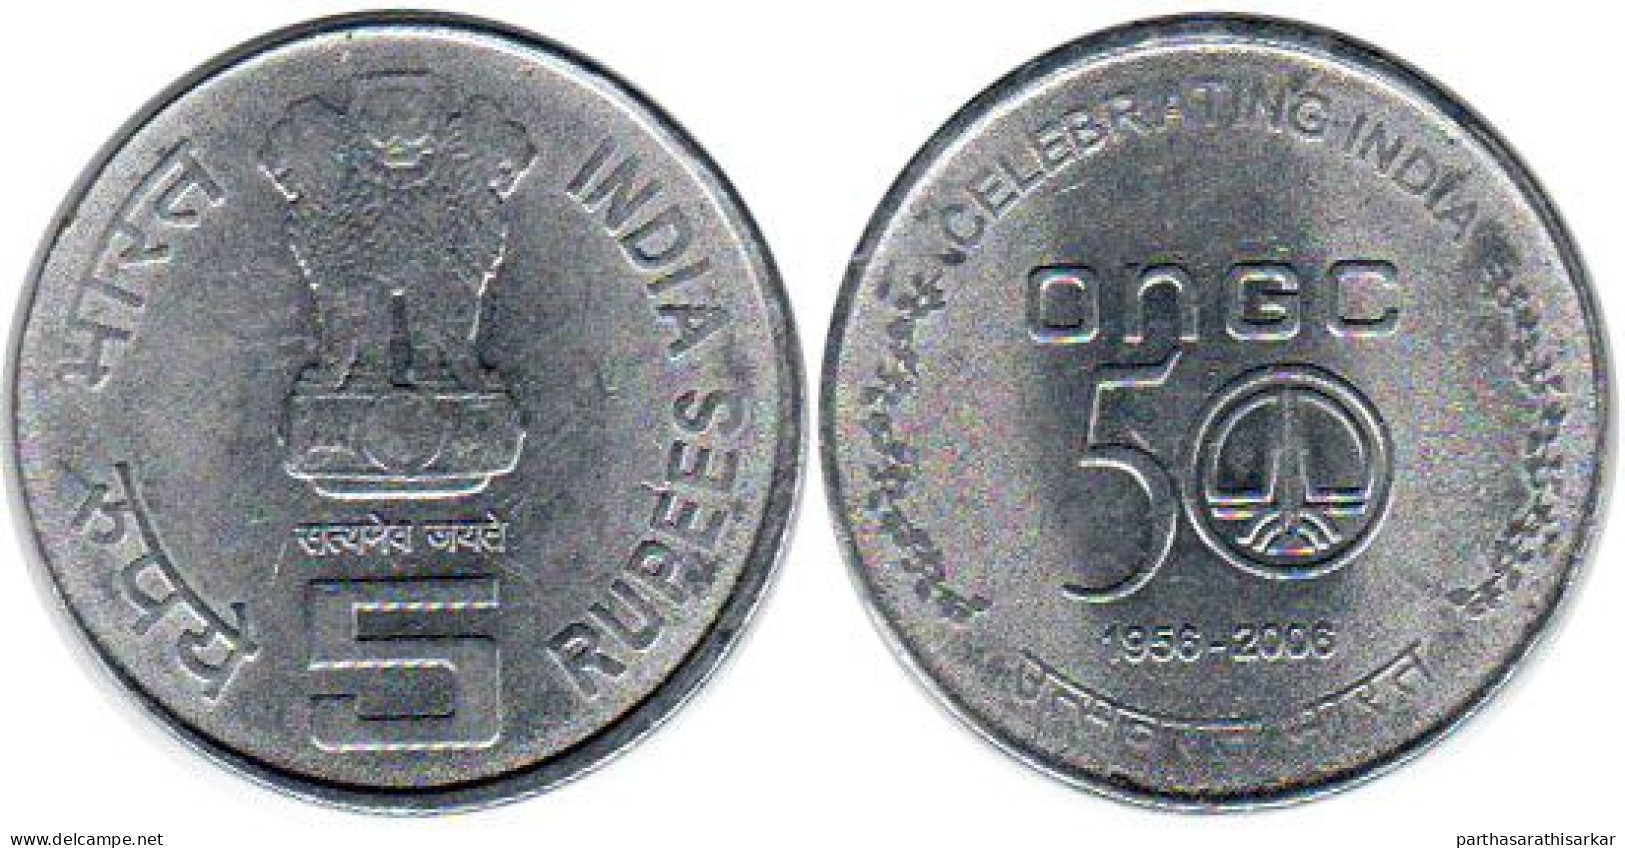 INDIA 2006 50TH ANNIVERSARY OF ONGC (OIL AND NATURAL GAS CORPORATION) 5 RUPEES COIN UNC - Inde